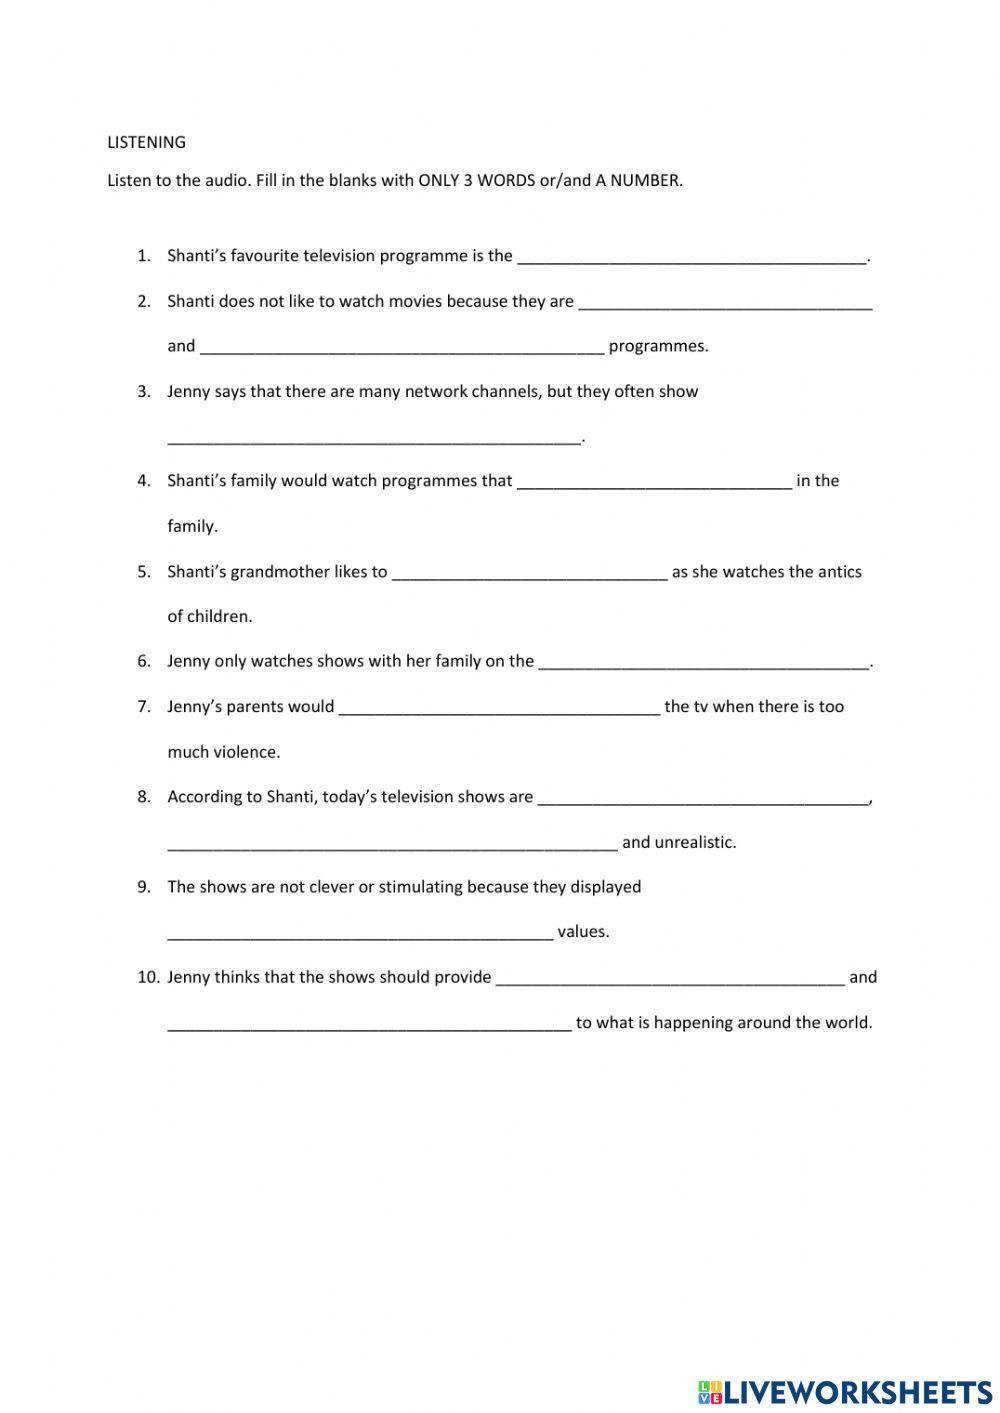 Unit 6, TIME OUT interactive worksheet | Live Worksheets